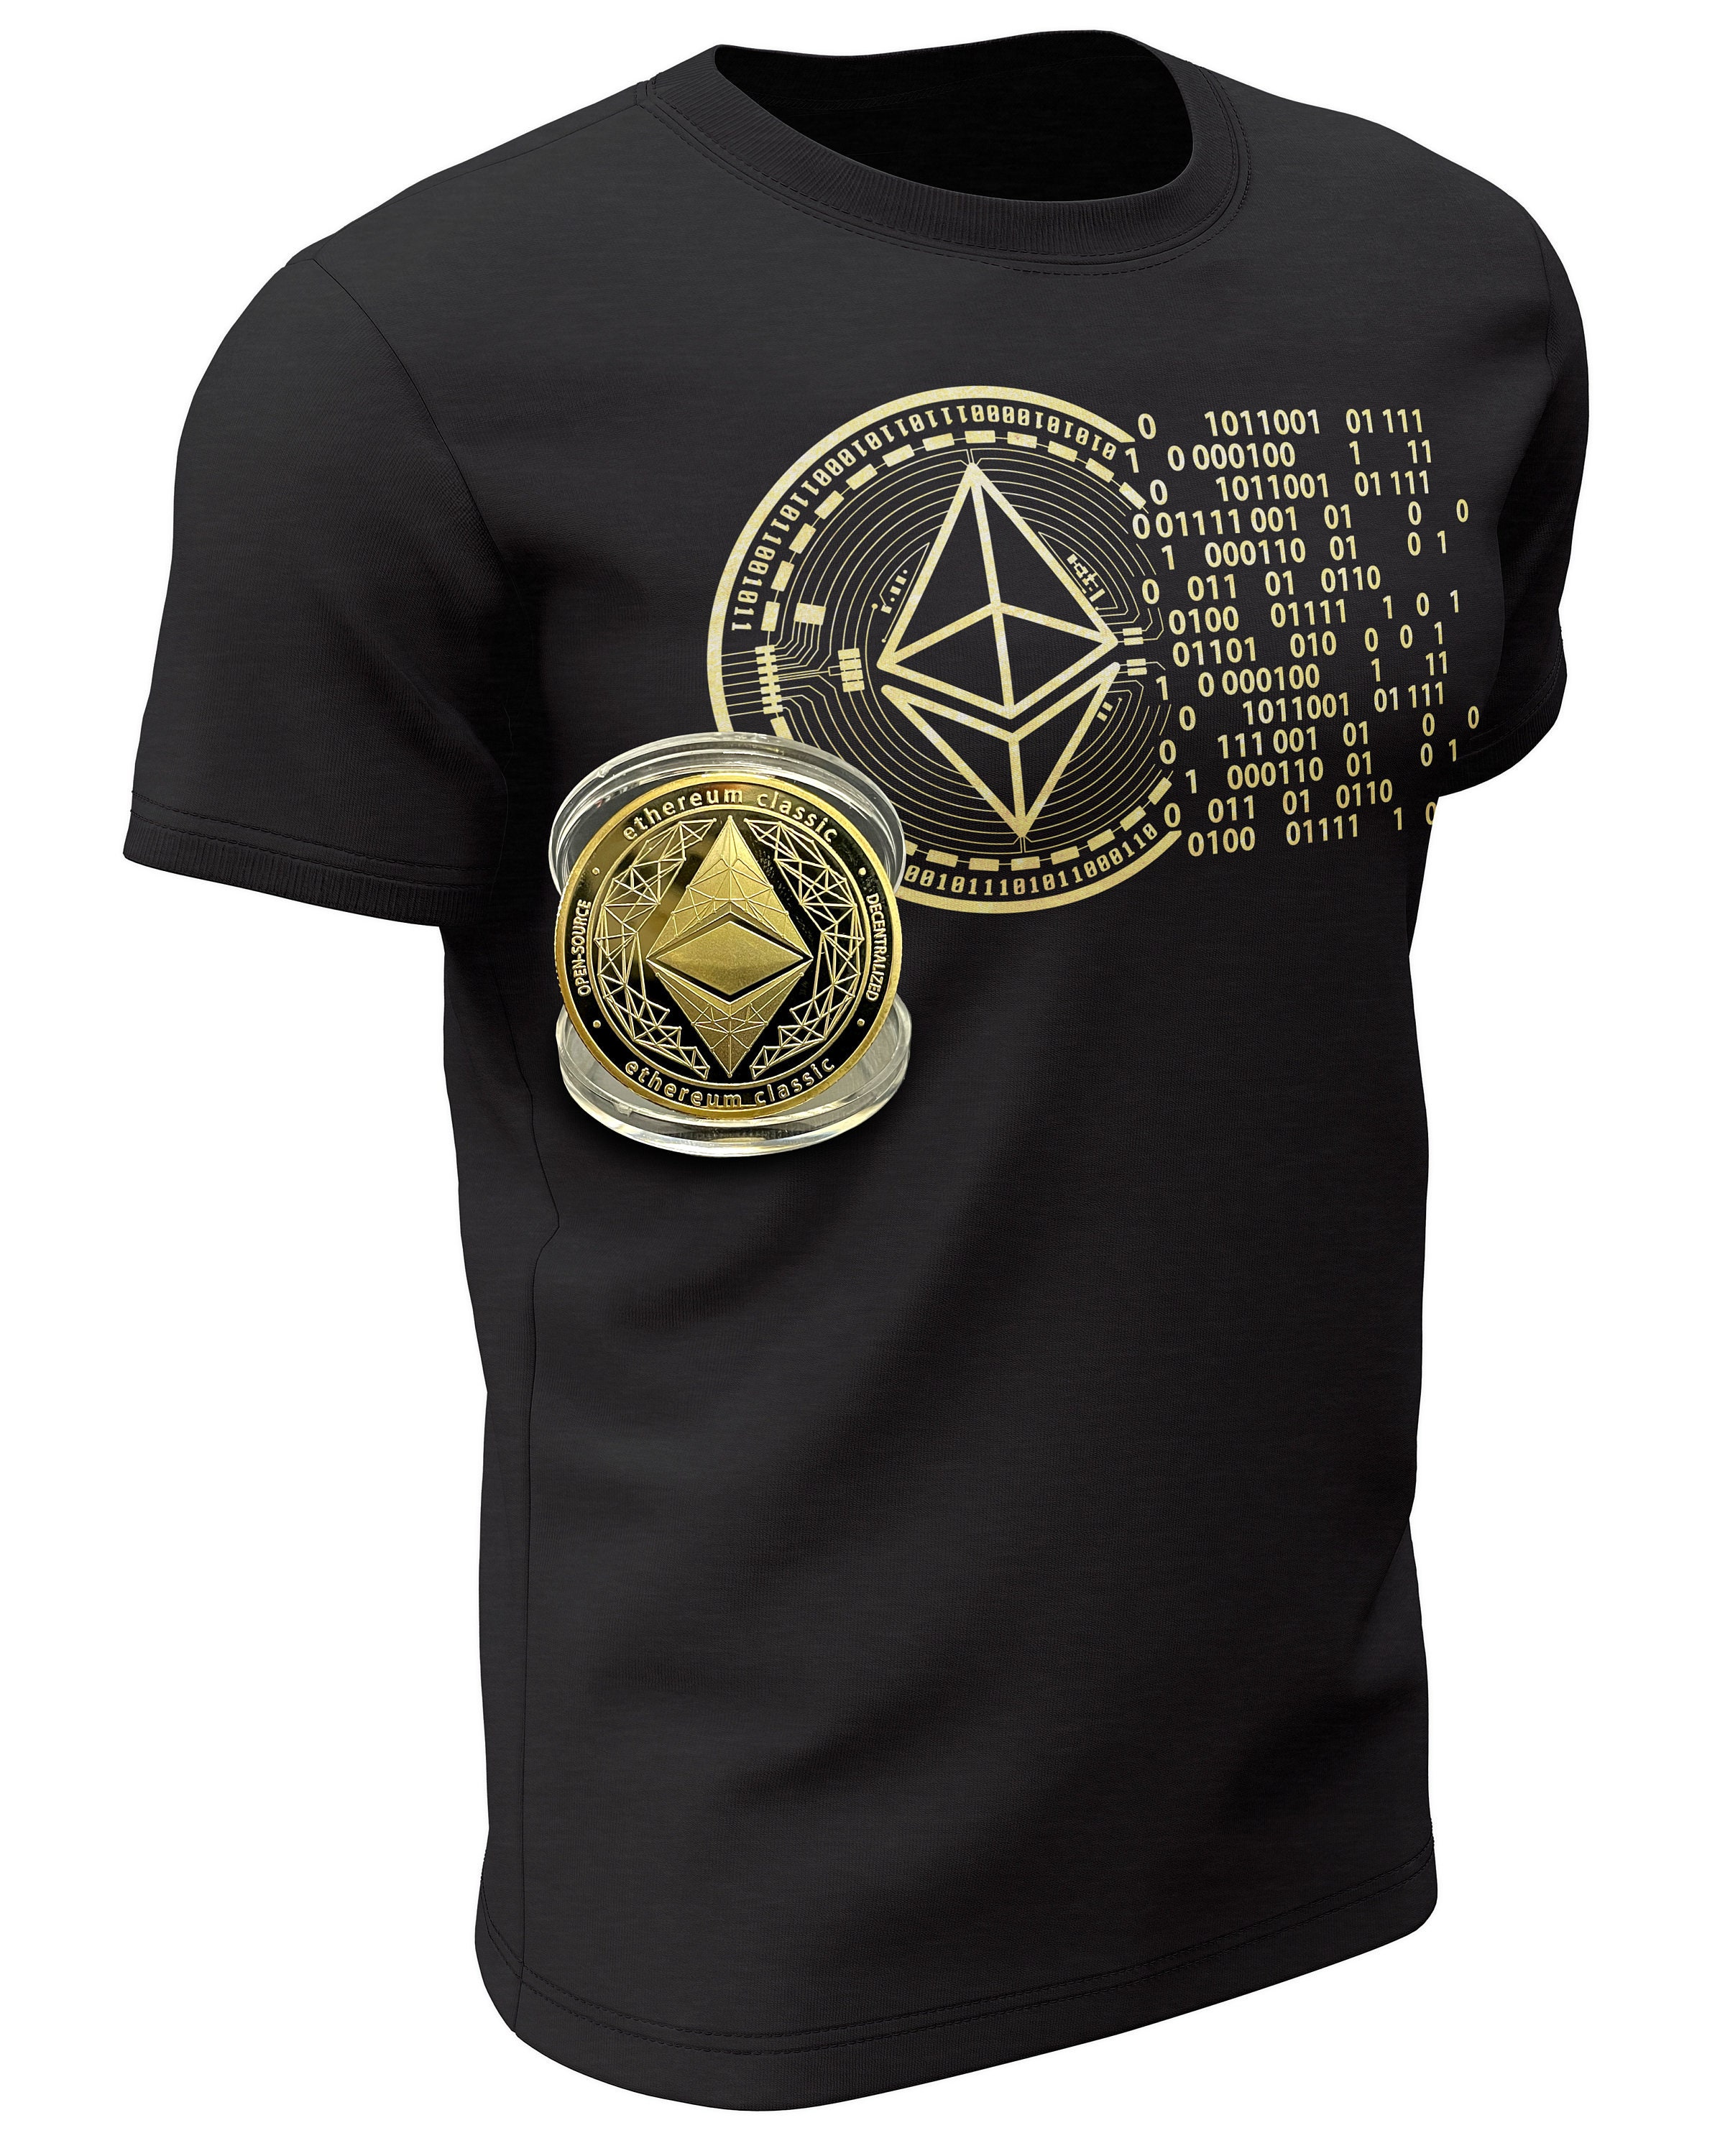 Bitcoin and Ethereum T-shirts With Gold Plated Bitcoin | Etsy